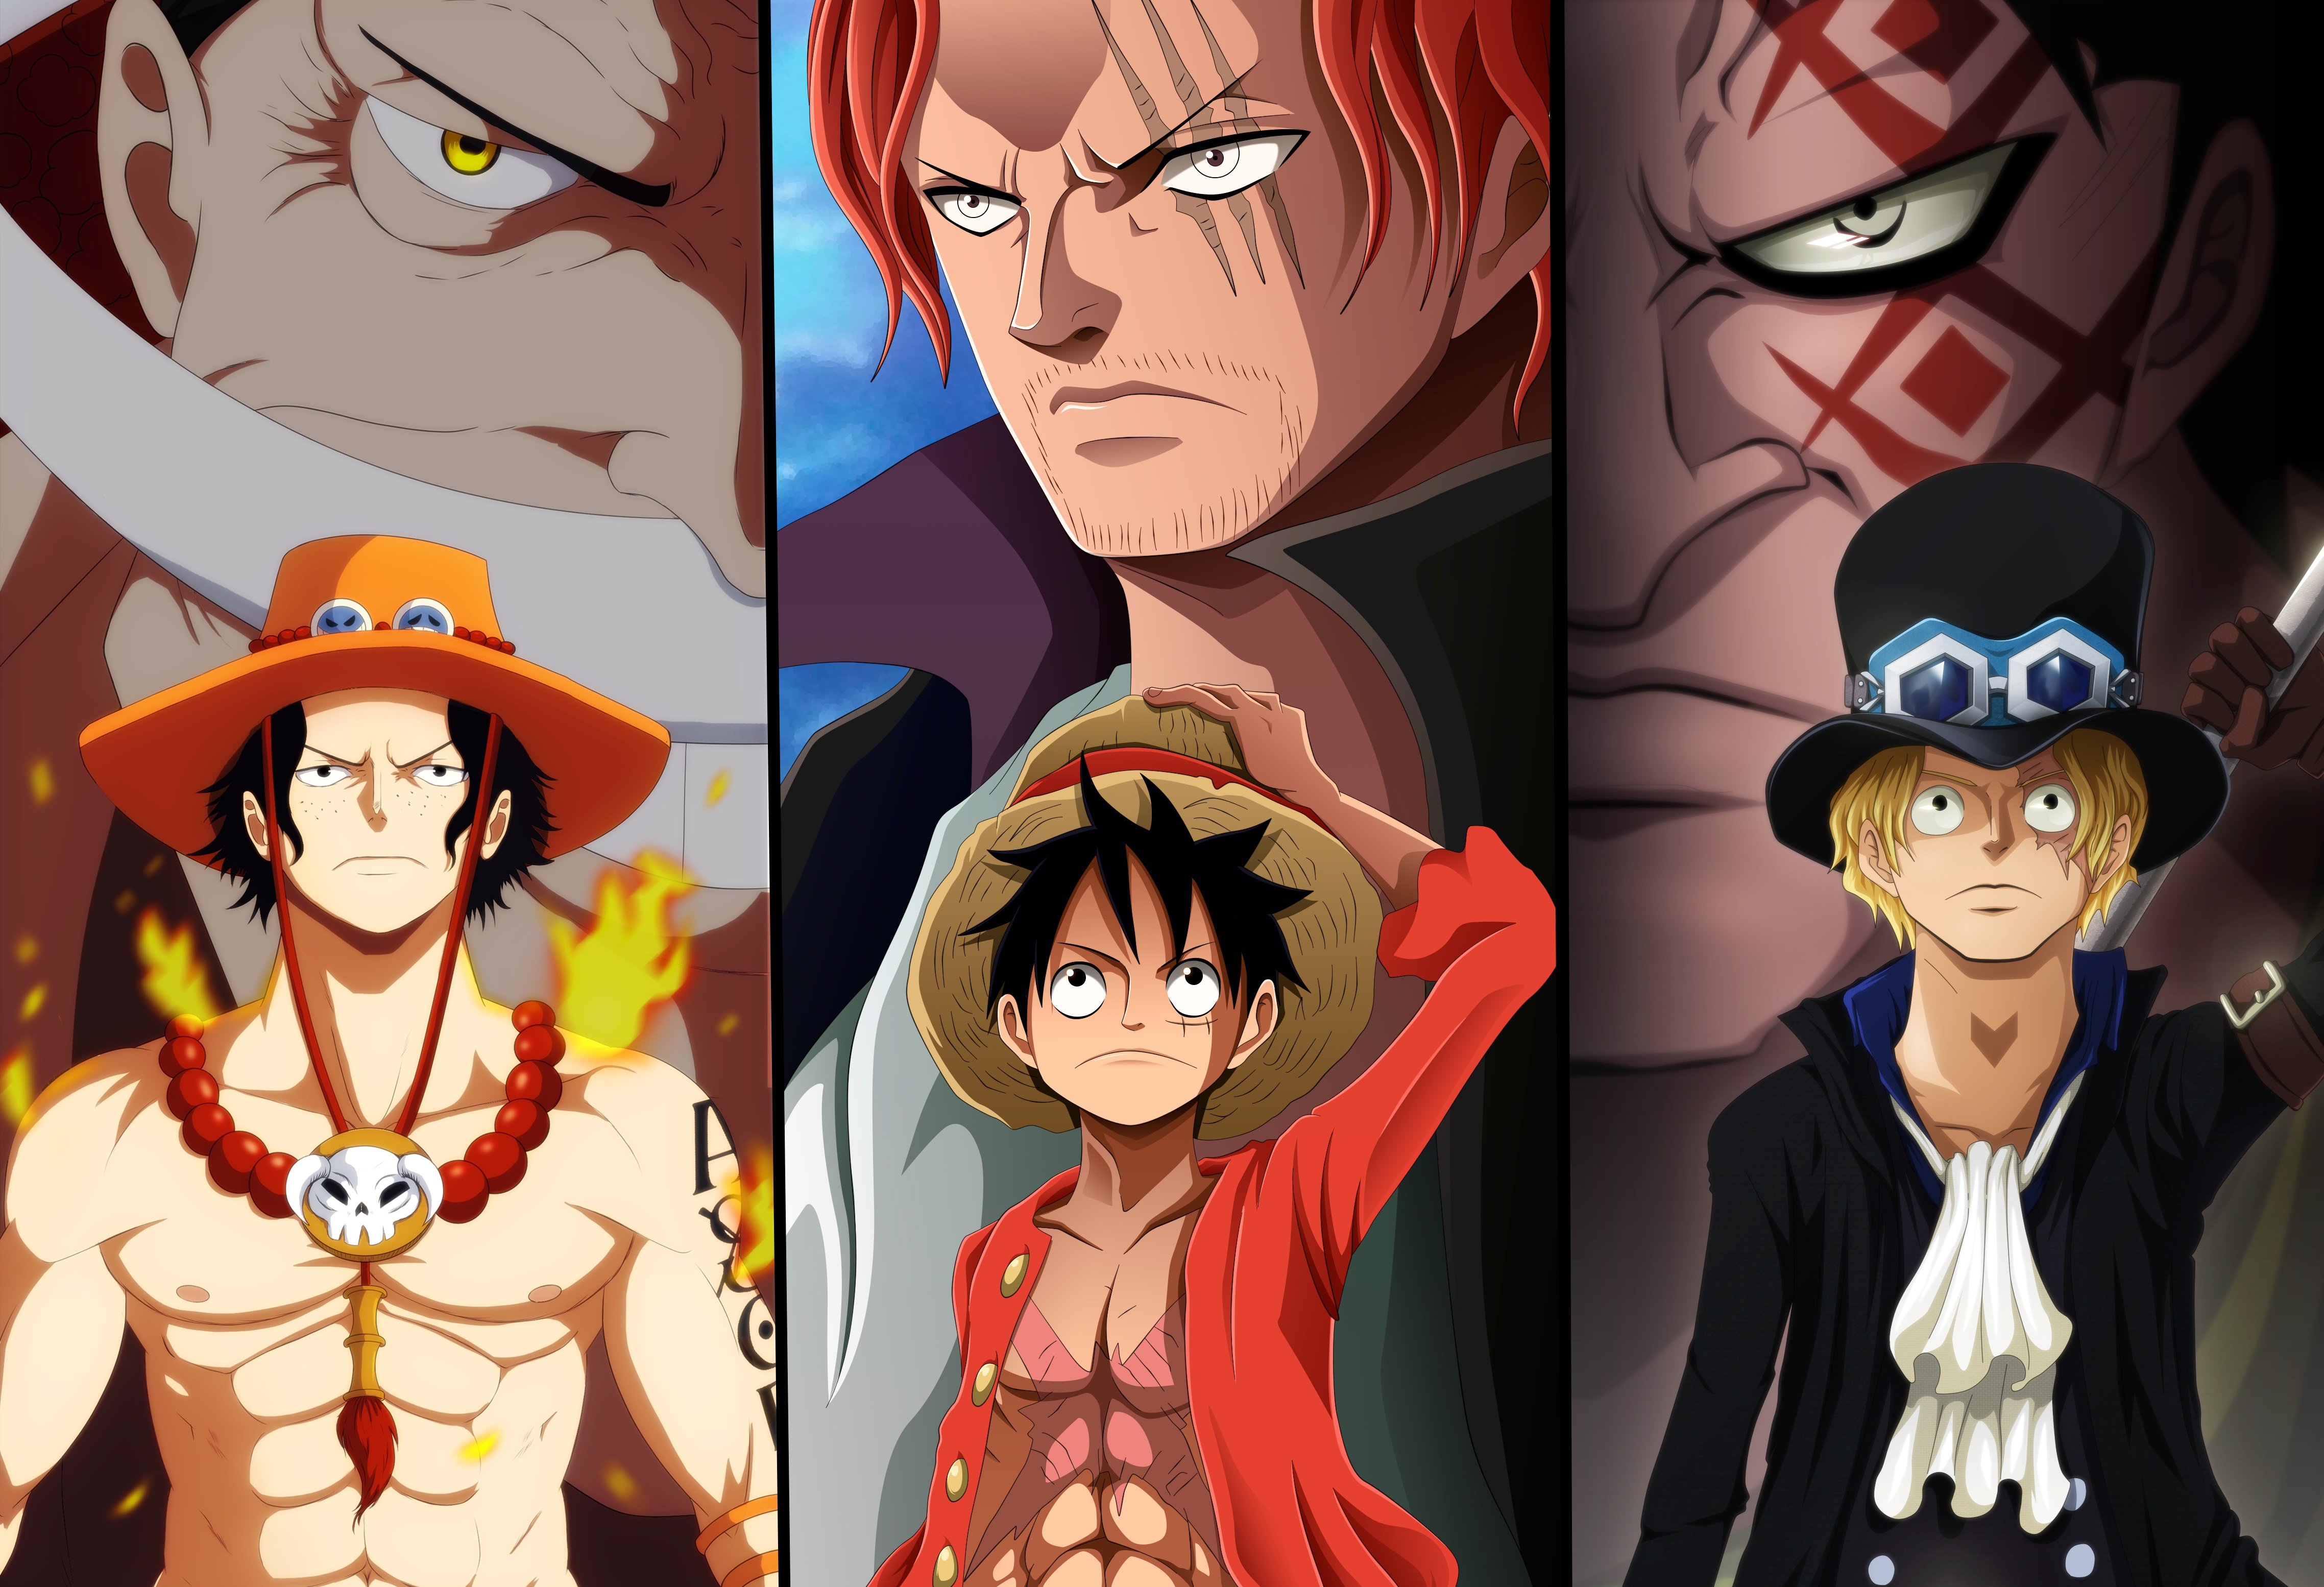 ASL One Piece Wallpapers  Wallpaper Cave